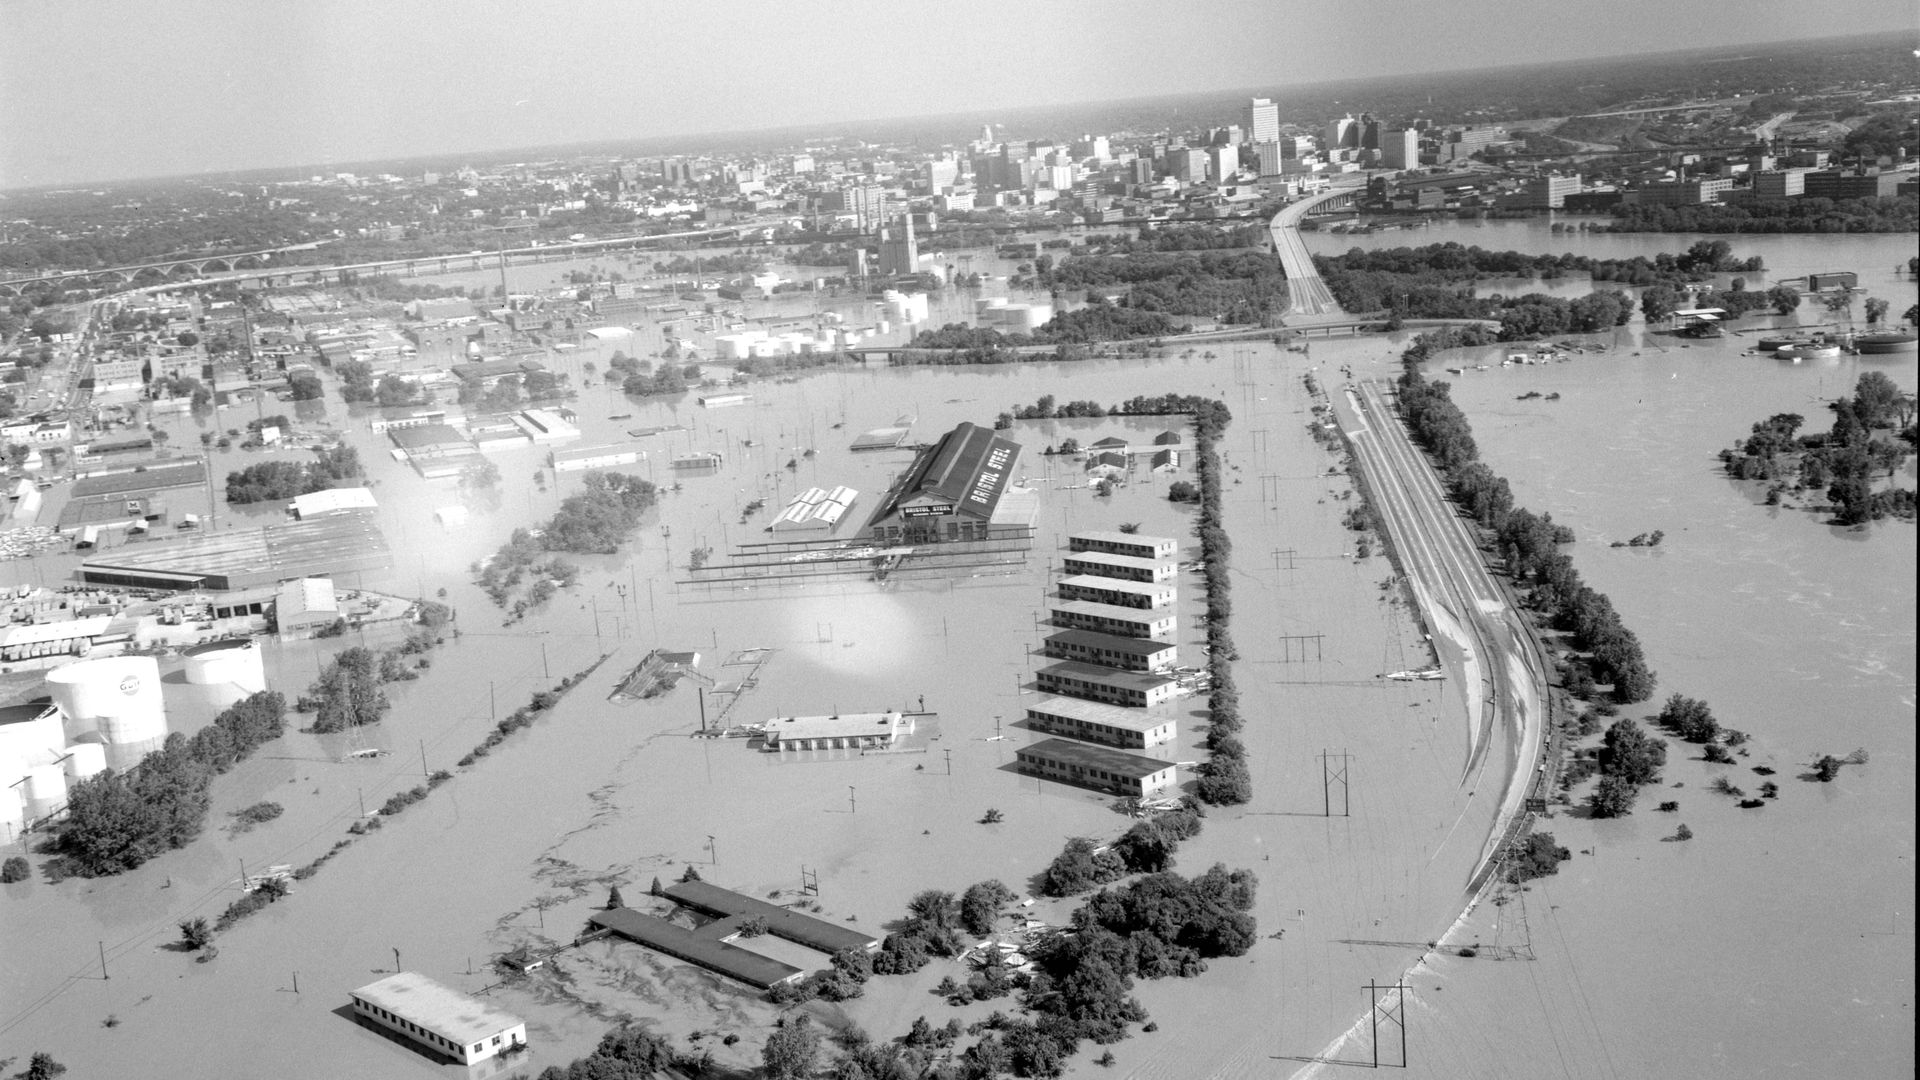 A flooded James River is shown swallowing a river with the city in the background